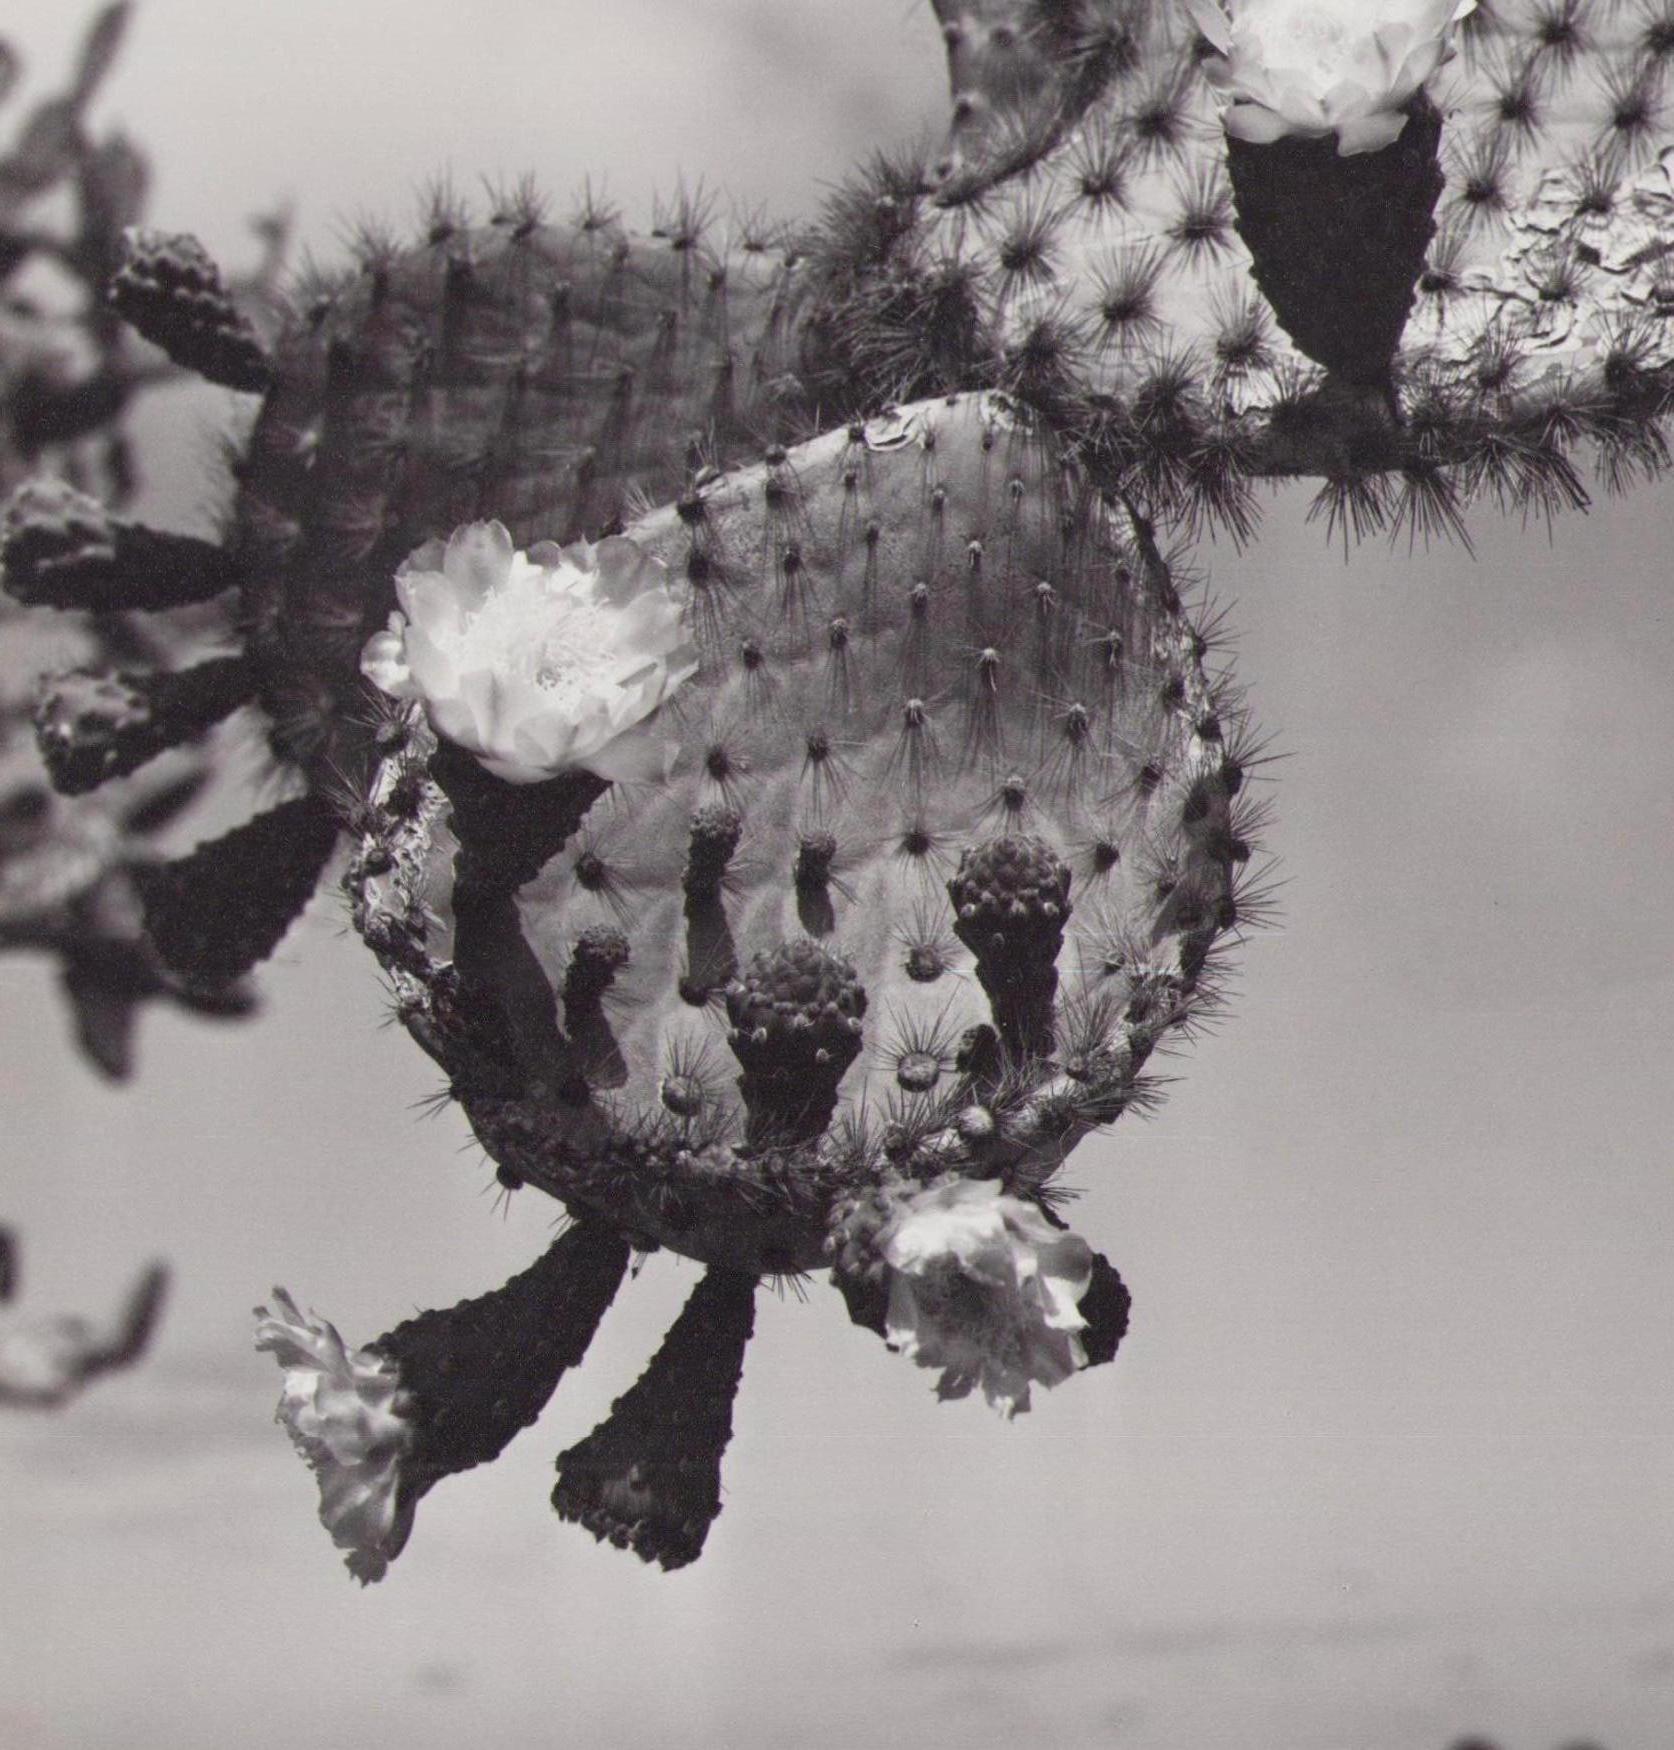 Galápagos, Cactus-Blossom, Black and White Photography, 1960s, 22, 5 x 22, 3 cm - Gray Portrait Photograph by Hanna Seidel